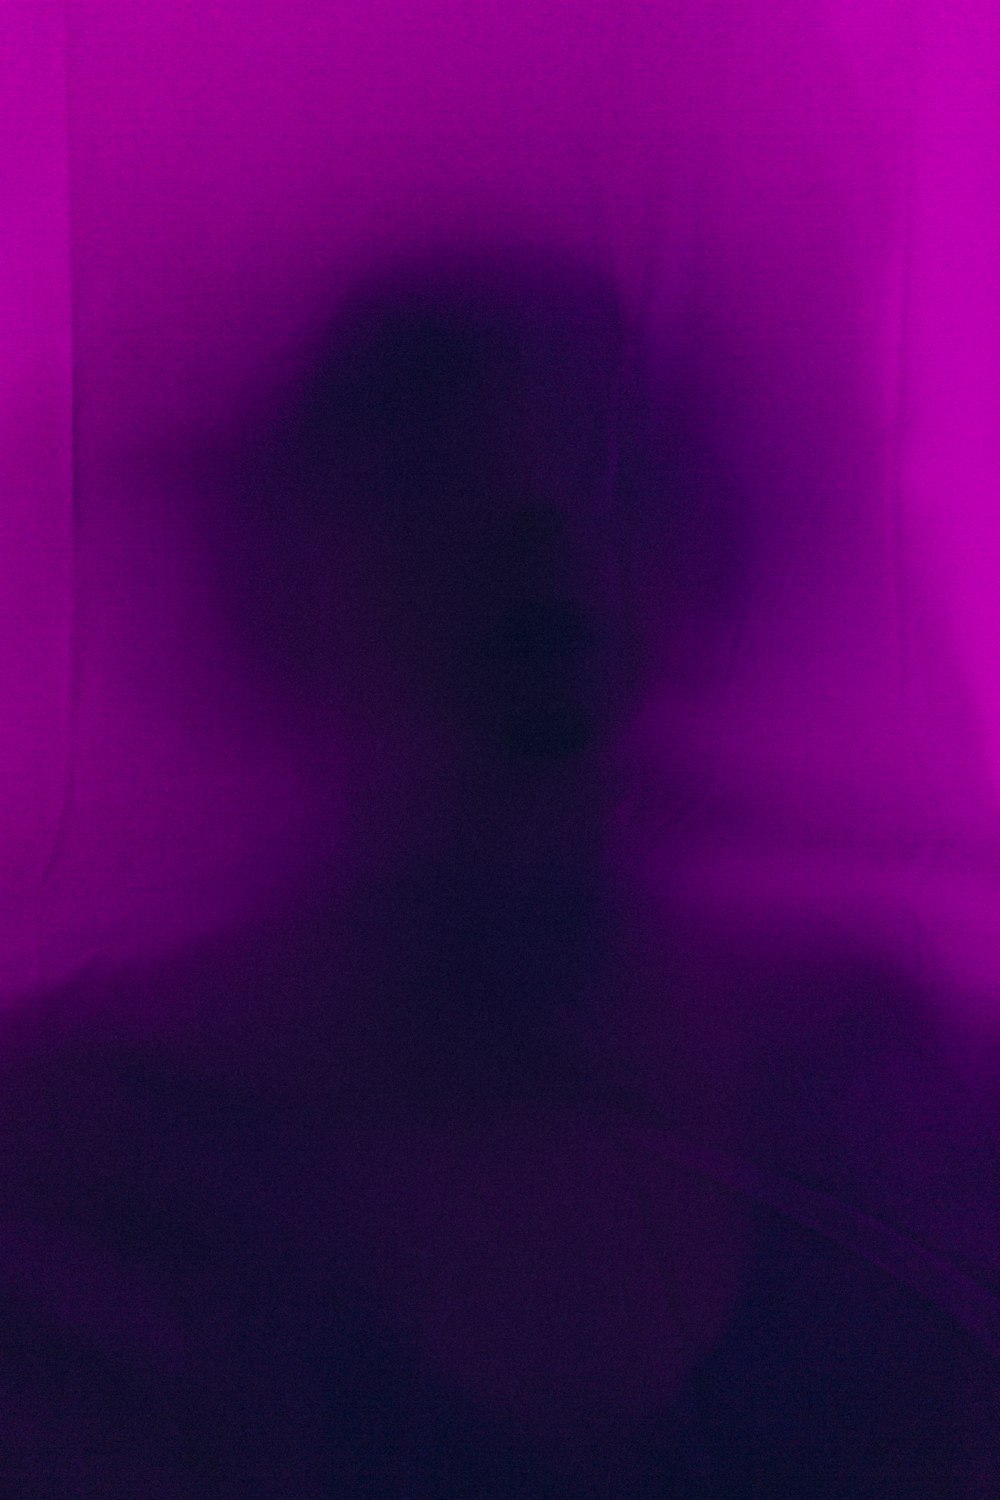 a blurry image of a person in a dark room